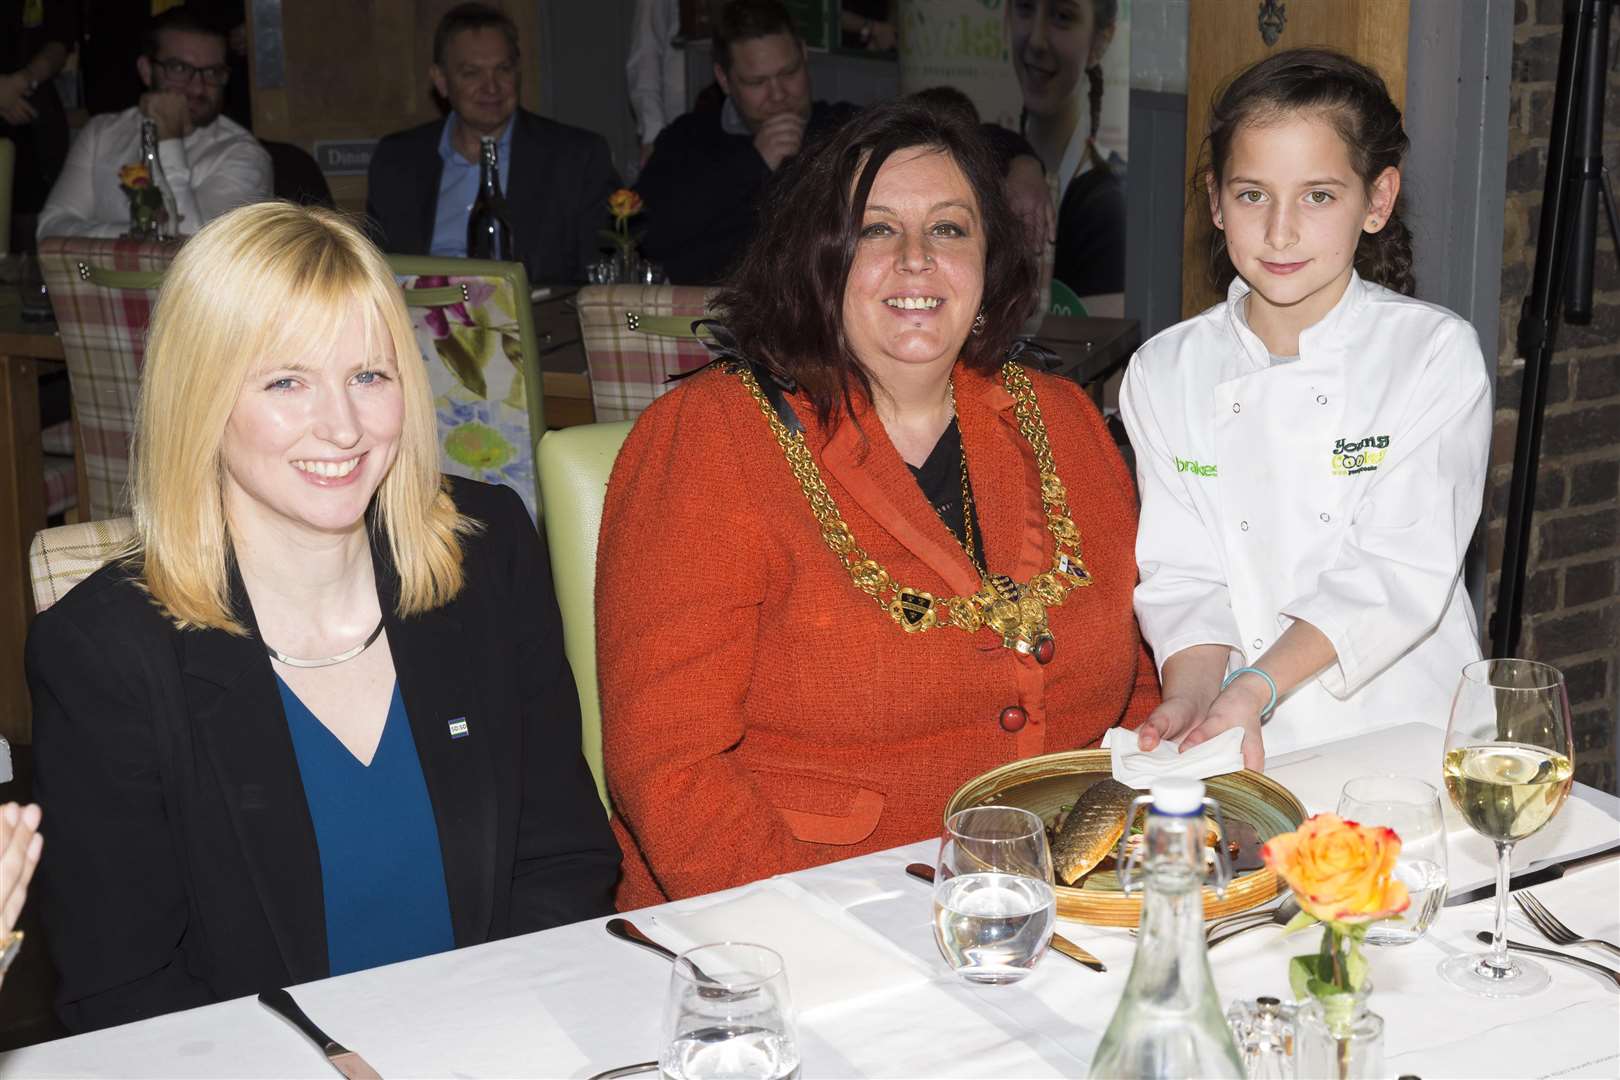 Young Cooks 2018 champion Boglar of St Nicholas Primary School serves her prize-winning food to the Mayor of Dover Cllr Susan Jones, sitting with Canterbury MP Rosie Duffield.